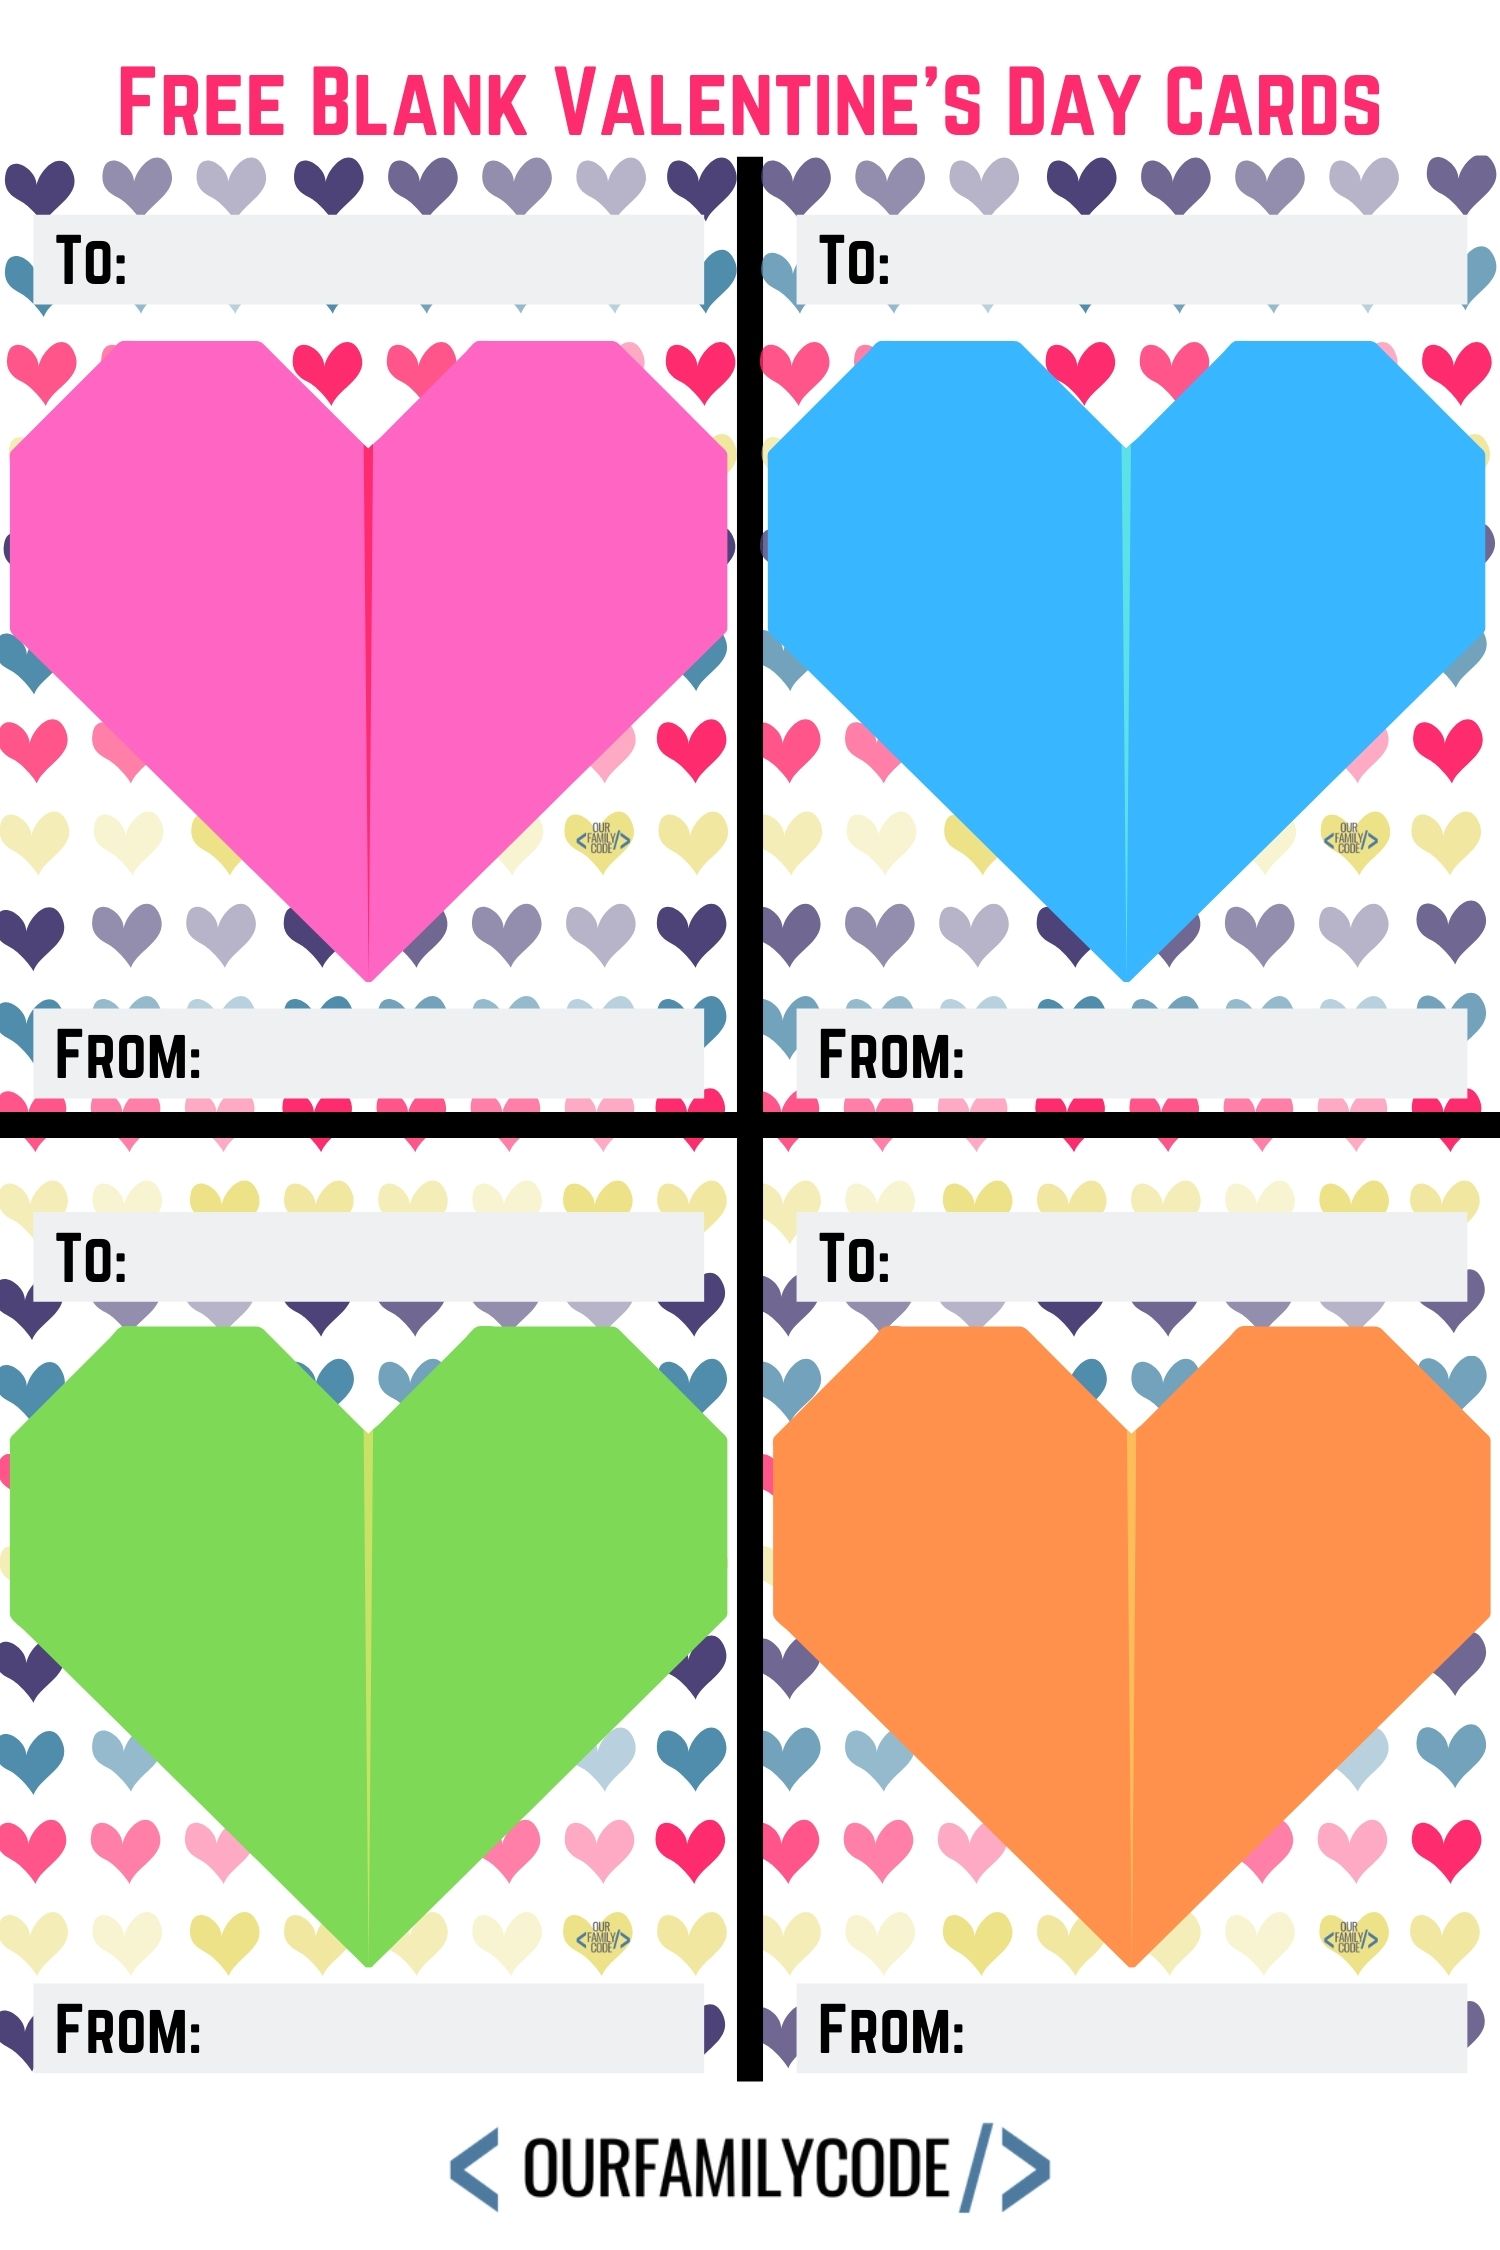 Free printable blank Valentine's Day cards